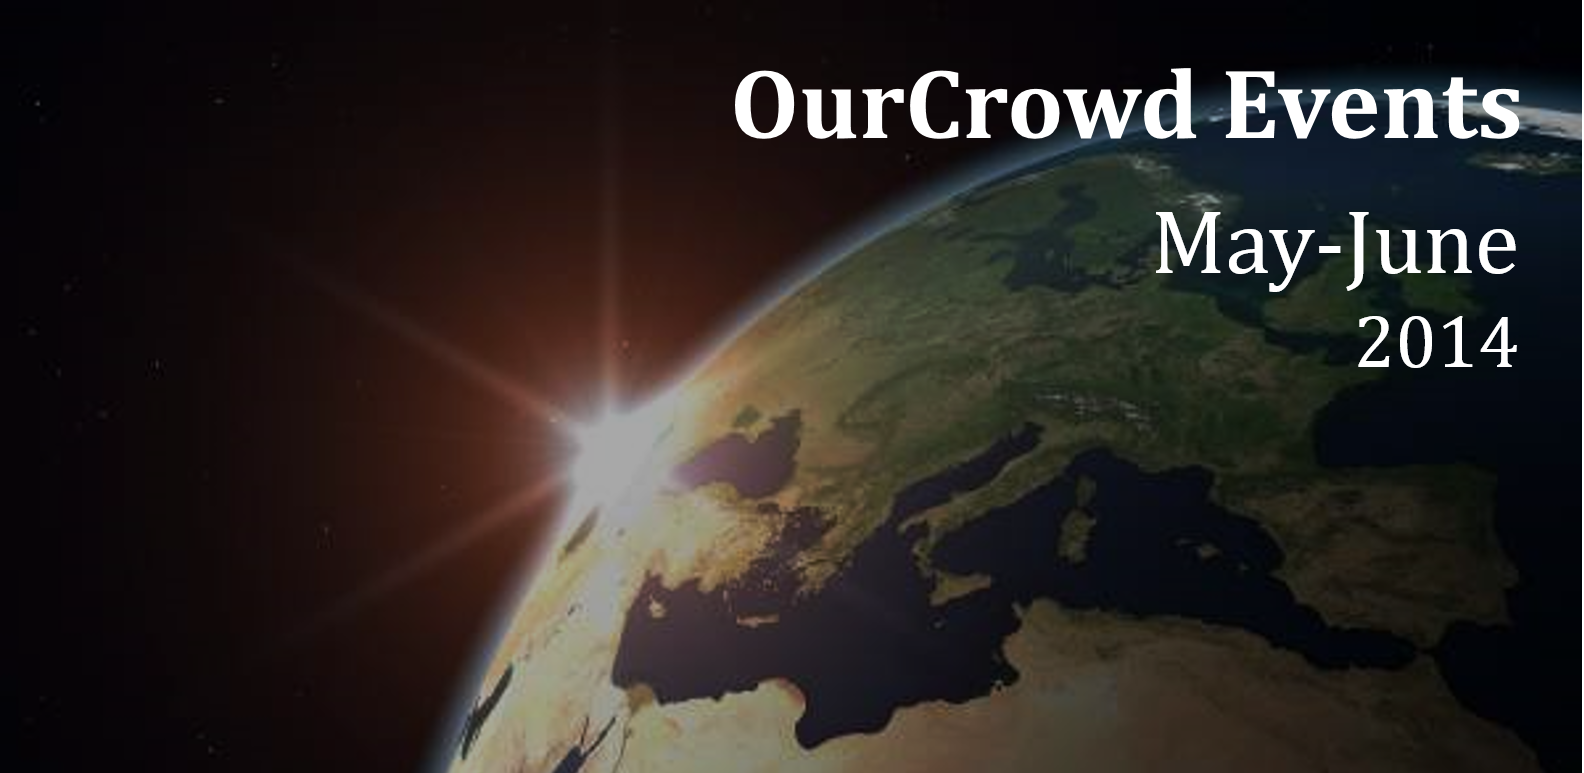 OurCrowd Events May-June